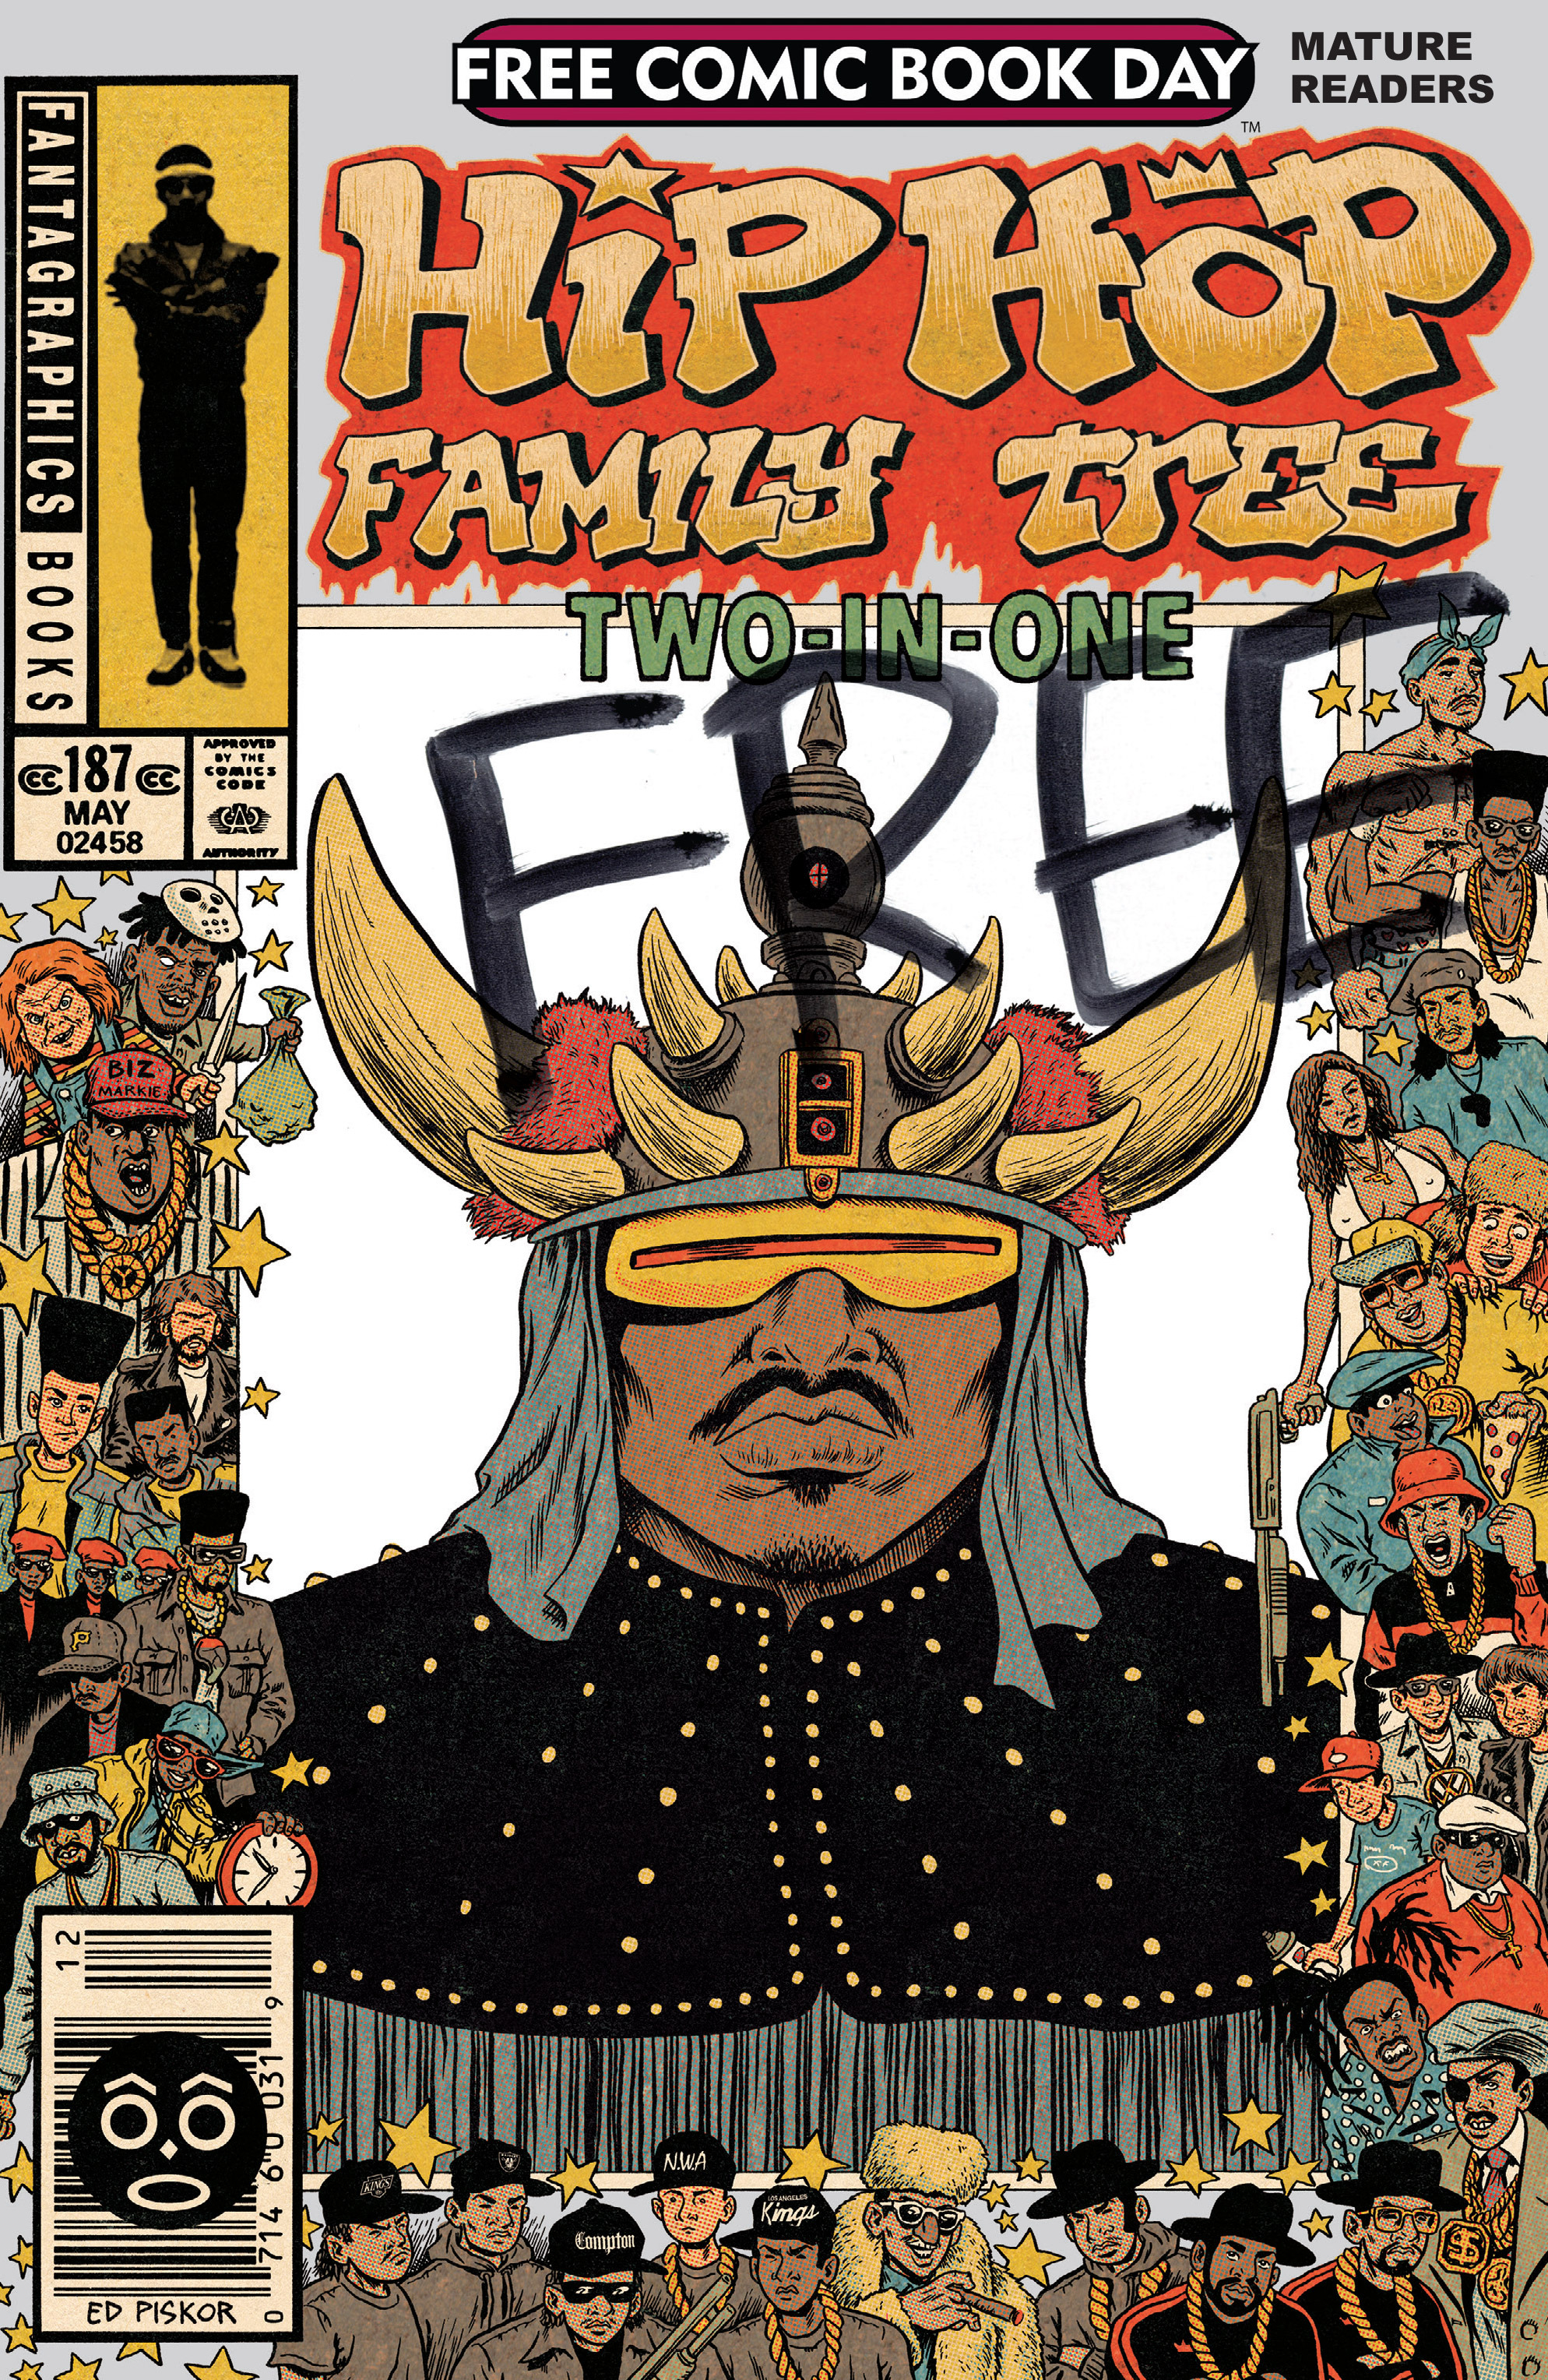 Read online Free Comic Book Day 2014 comic -  Issue # Hip Hop Family Tree Two-in-One - 1